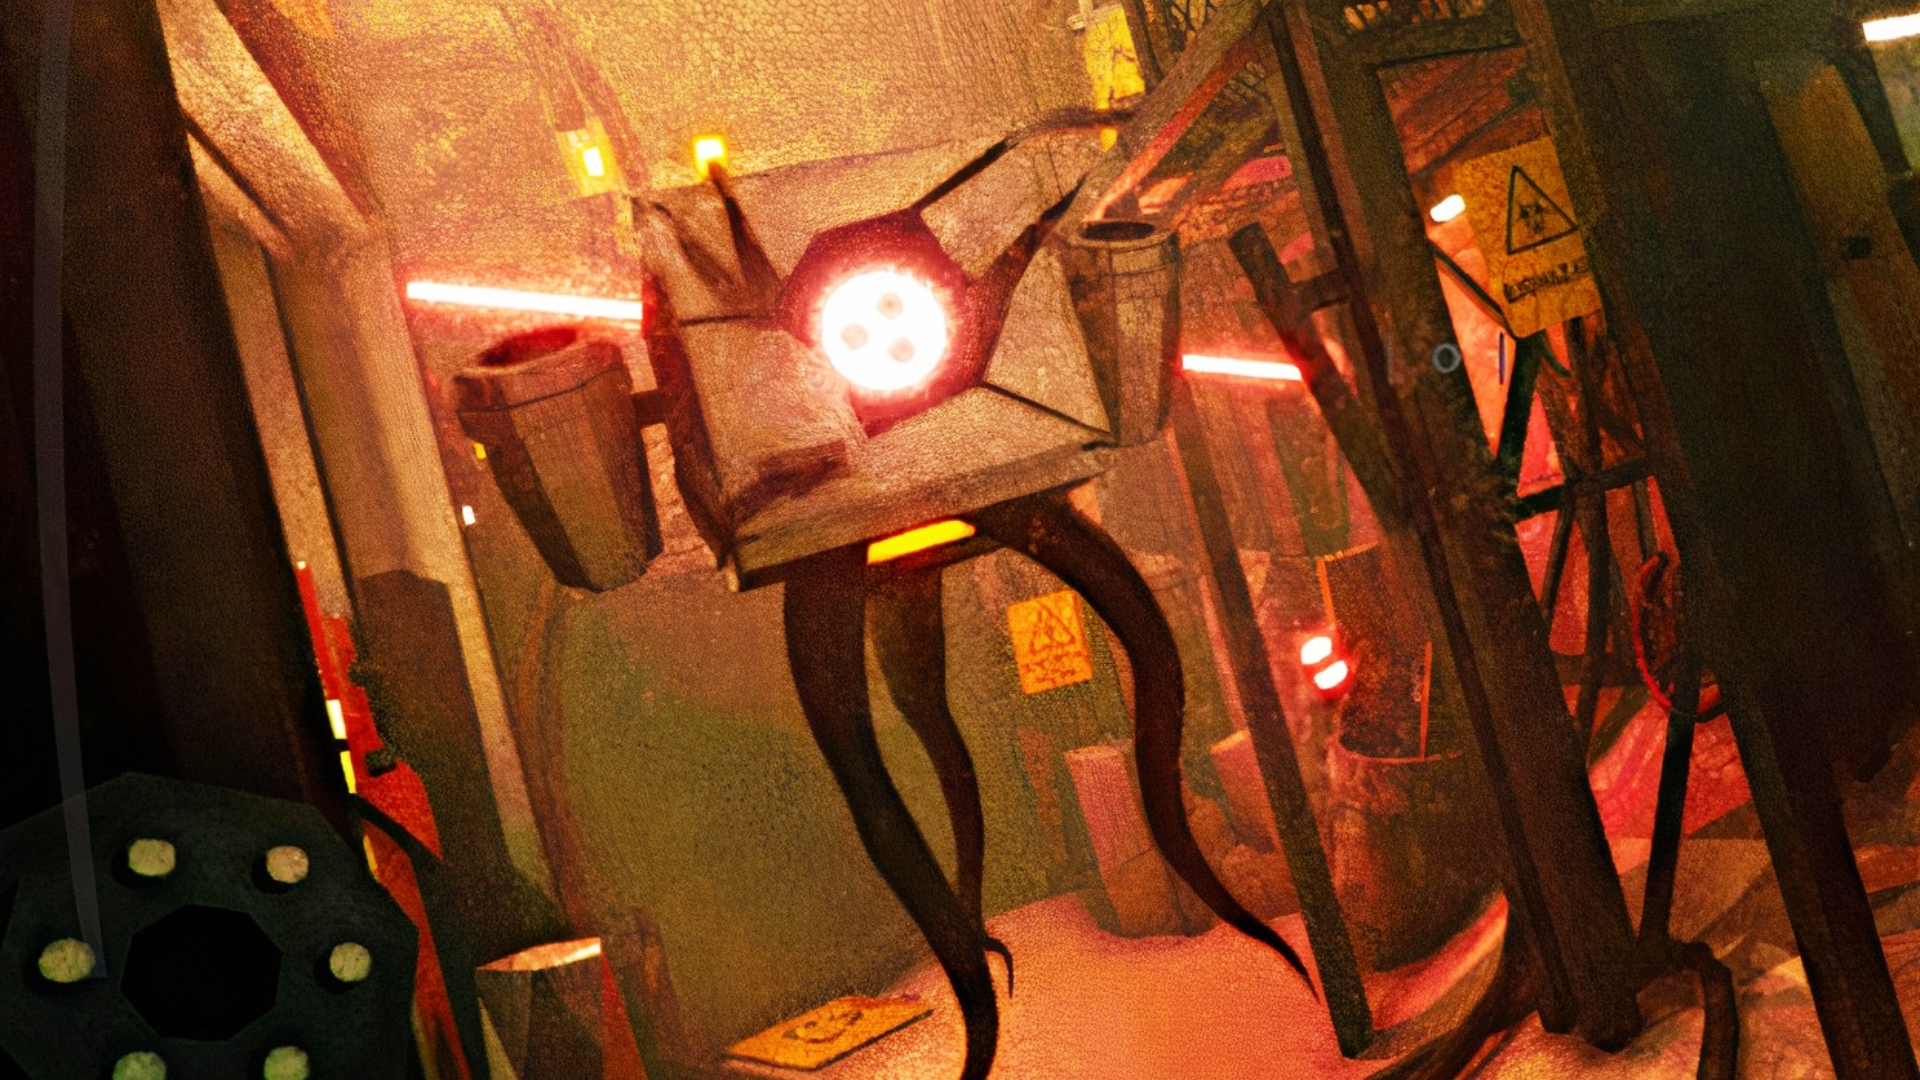 Half-Life meets Portal in new physics-based puzzler you can try now